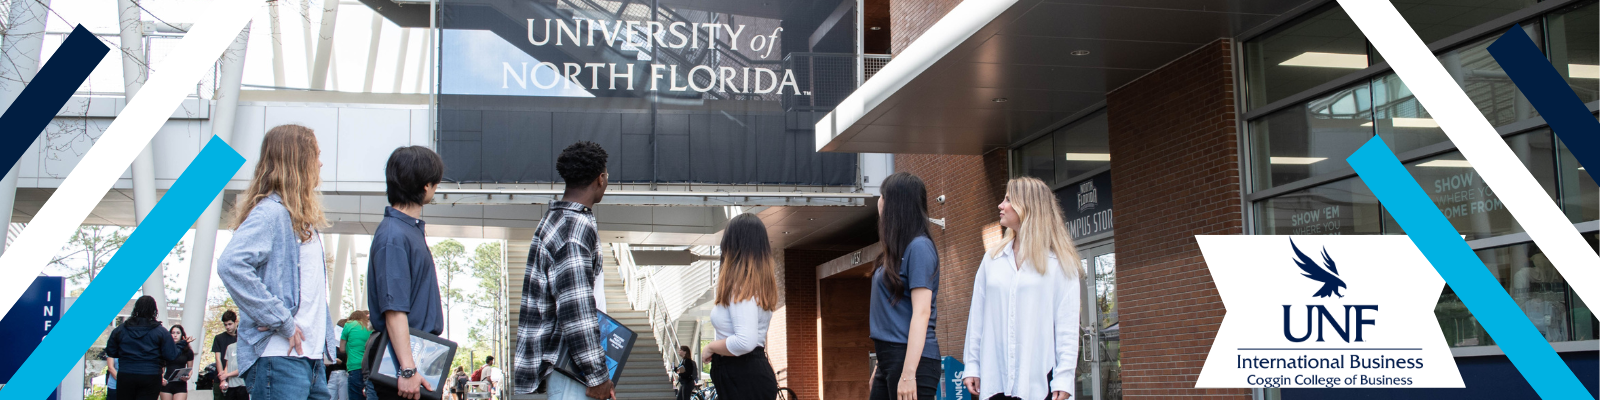 6 international business students standing next to a blue metal UNF sign with international business logo in blue in the bottom right corner 